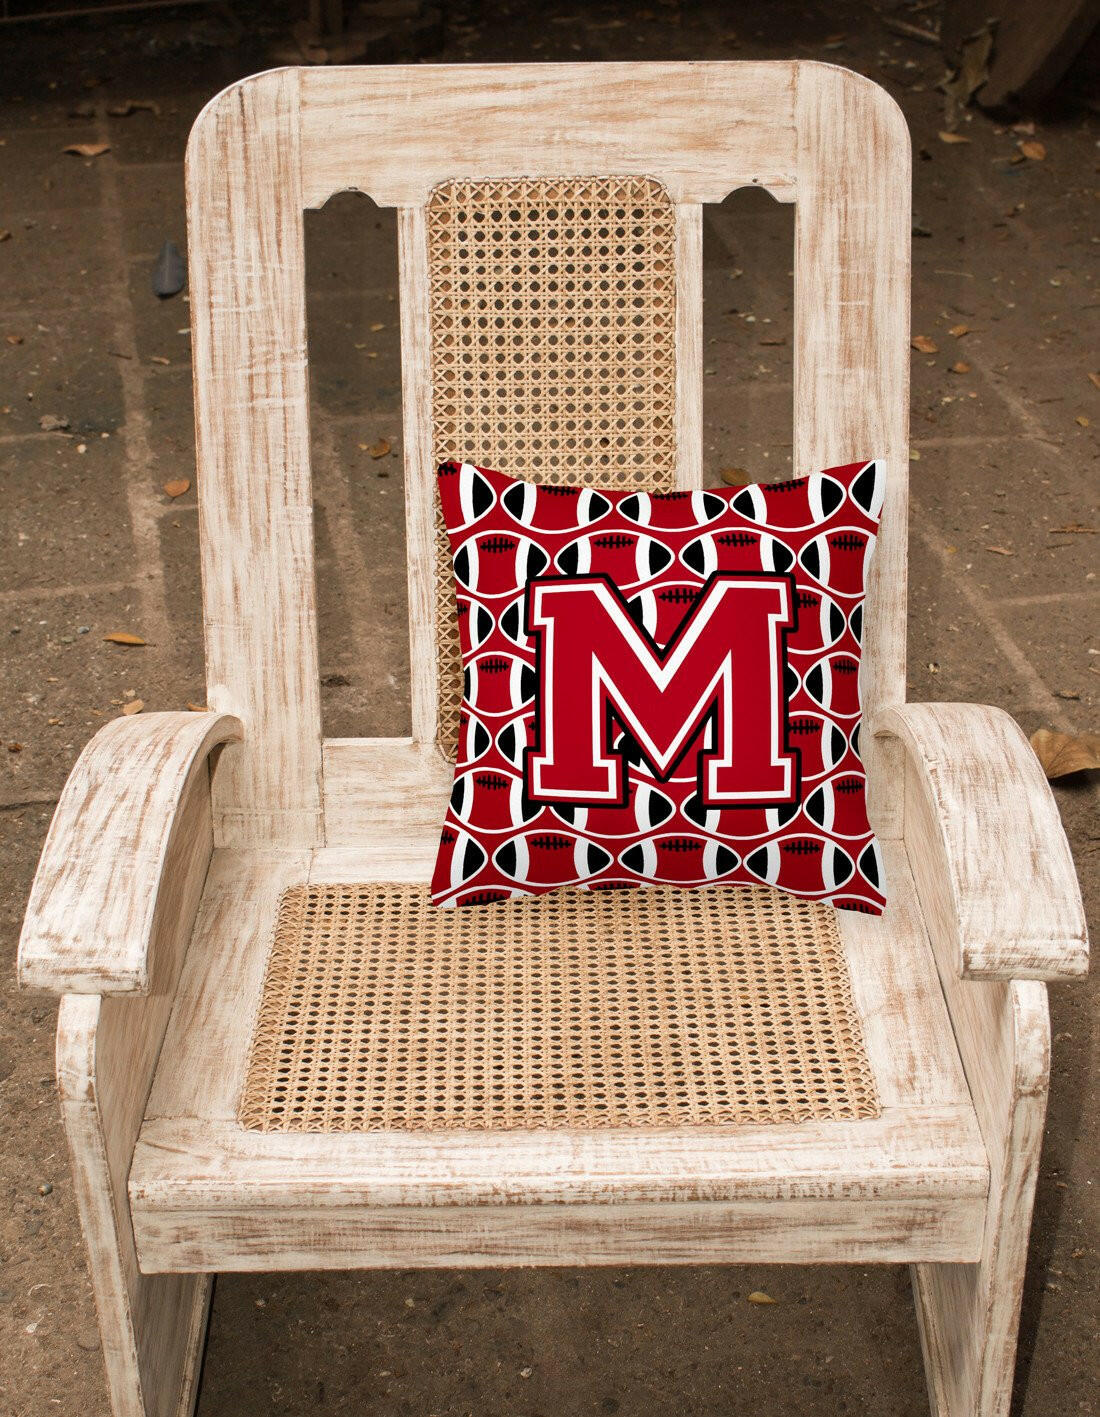 Letter M Football Red, Black and White Fabric Decorative Pillow CJ1073-MPW1414 by Caroline's Treasures